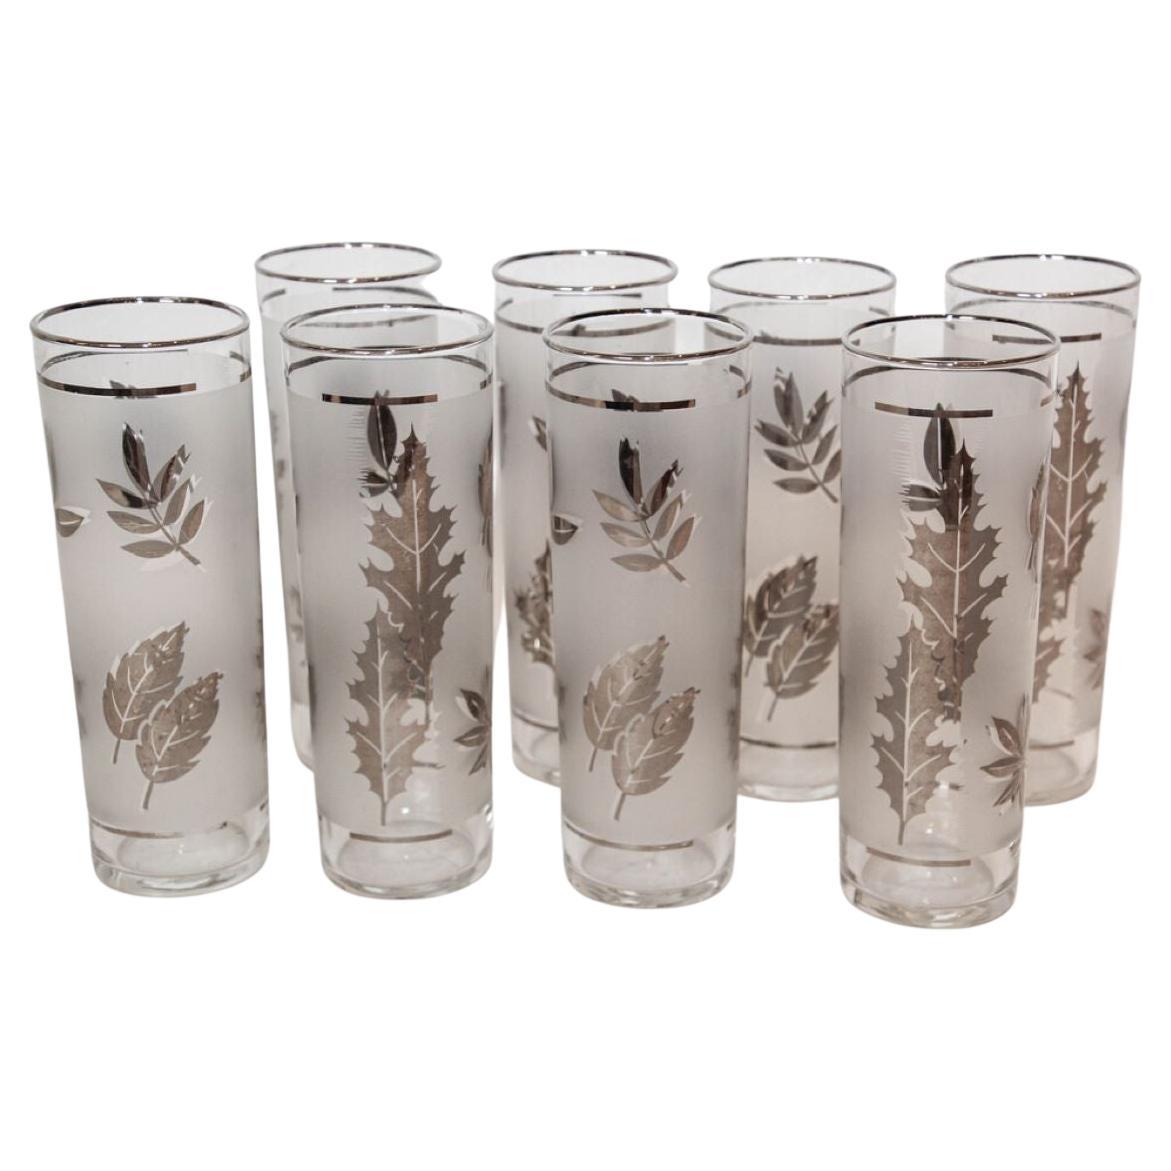 1950s Silver Foliage Highball Cocktail Glasses by Libbey Glass Co Set of 8 For Sale